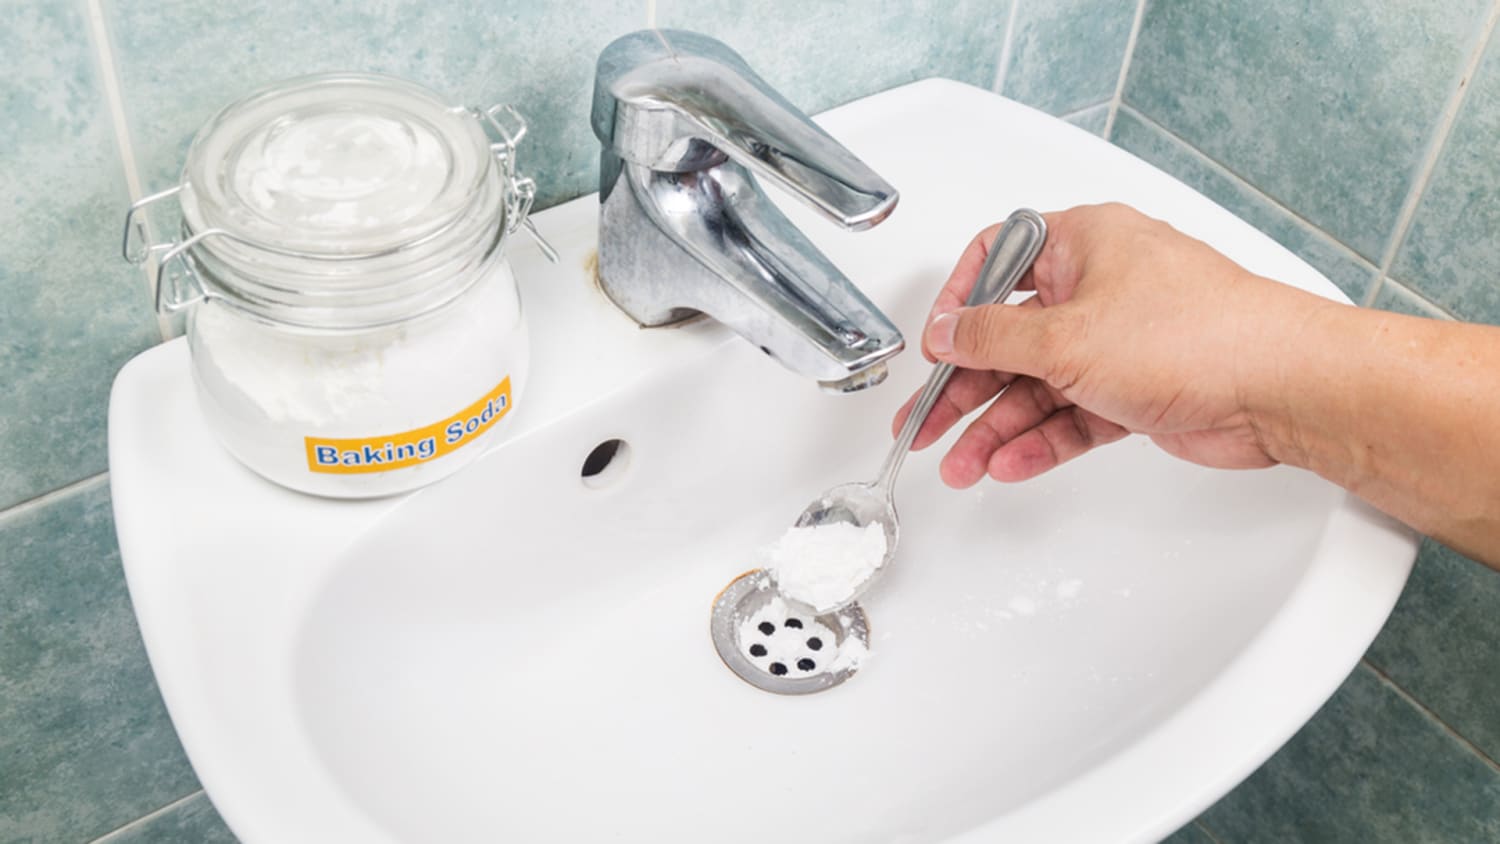 How To Unclog A Drain Without Calling Plumber - How To Get A Stopper Out Of Bathroom Sink